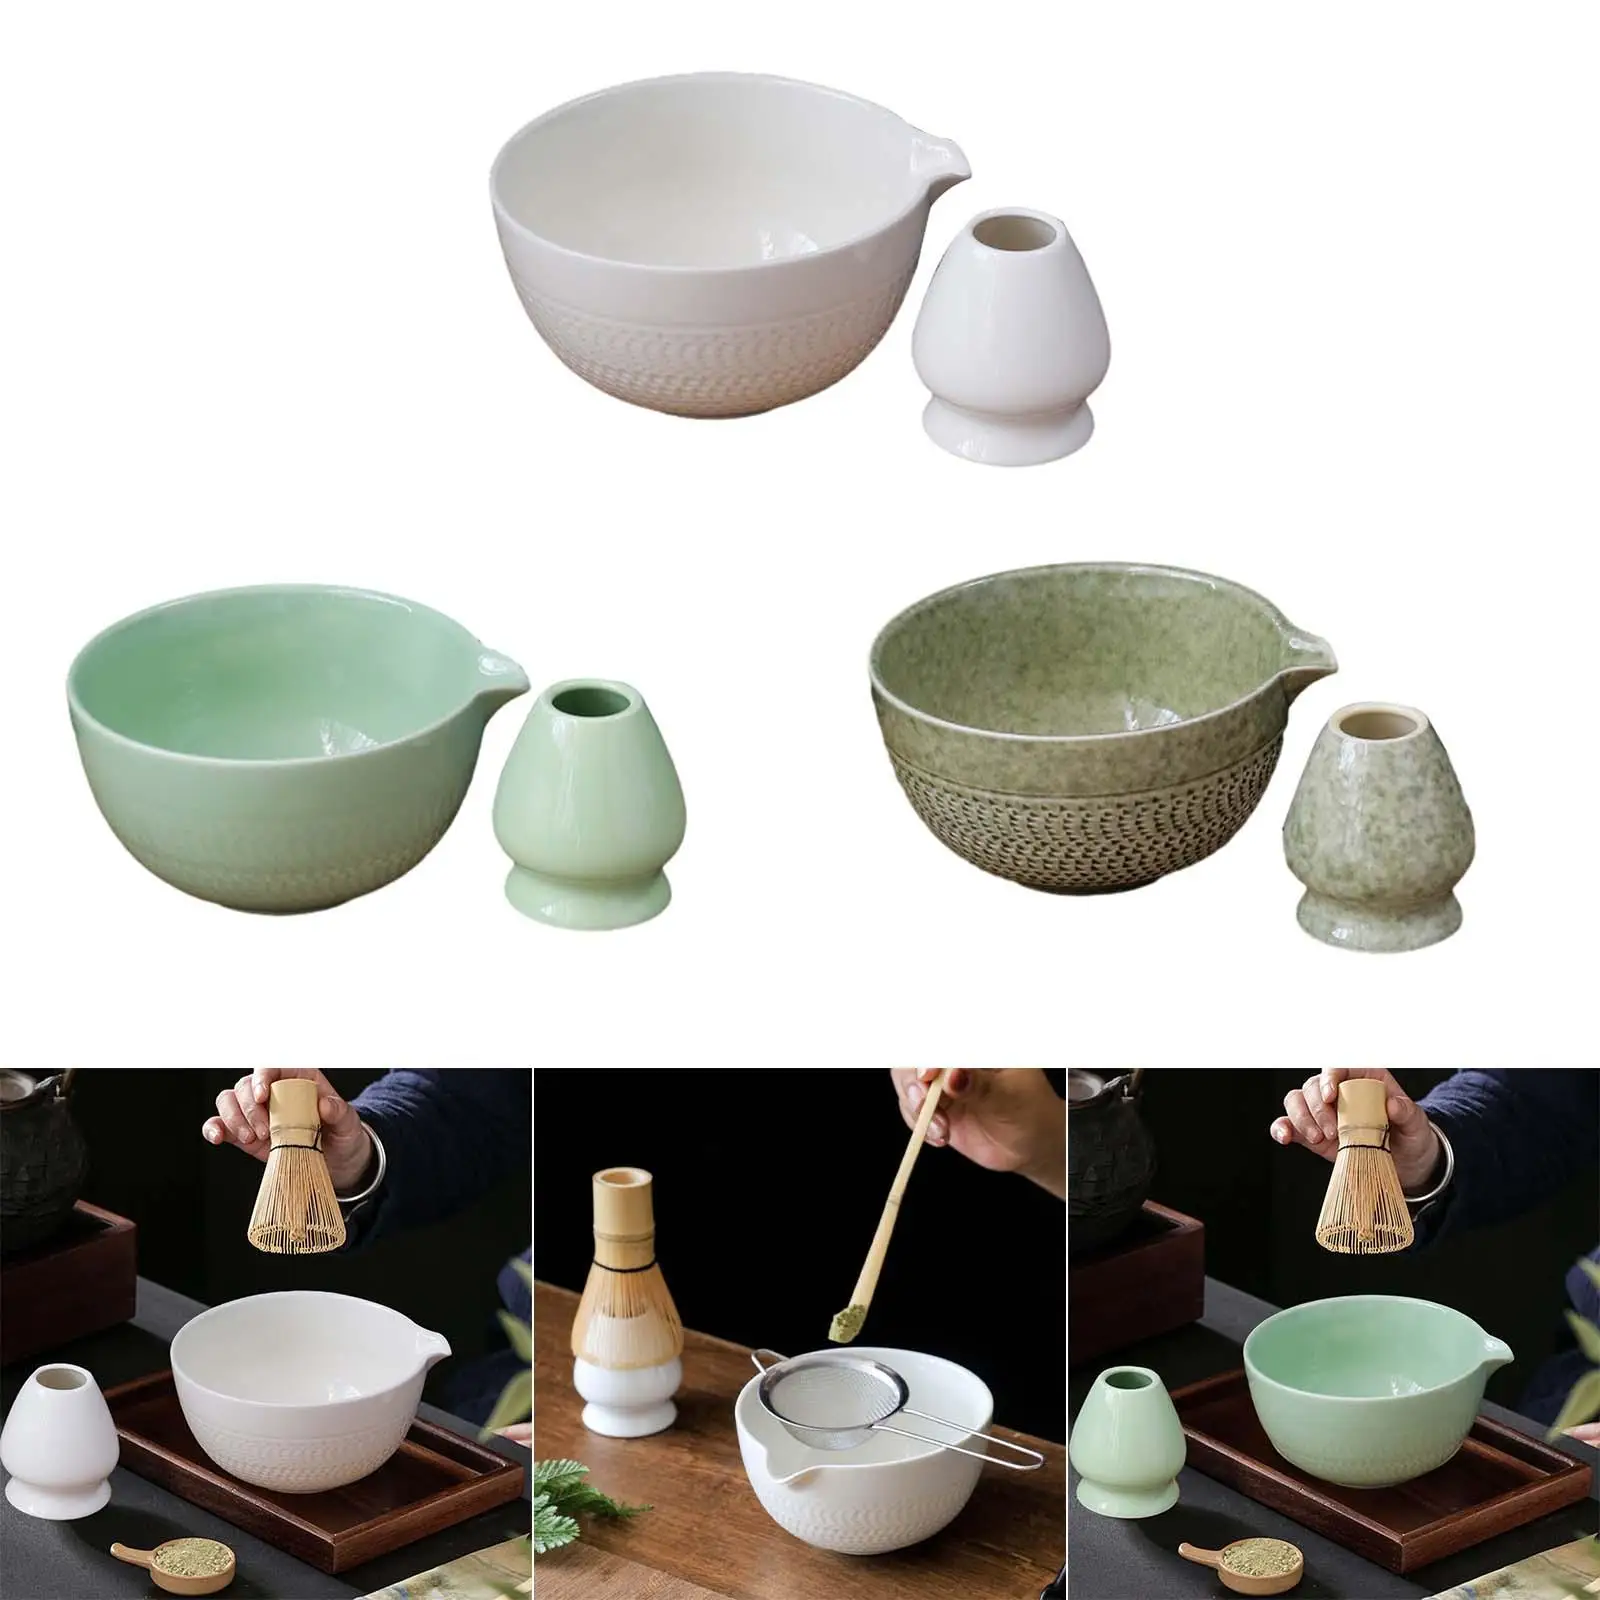 

2 Pieces Ceramic Matcha Bowls with Whisk Holder 500ml Ceramic Matcha Bowl for Office Traditional Ceremonial Tea Ceremony Bedroom